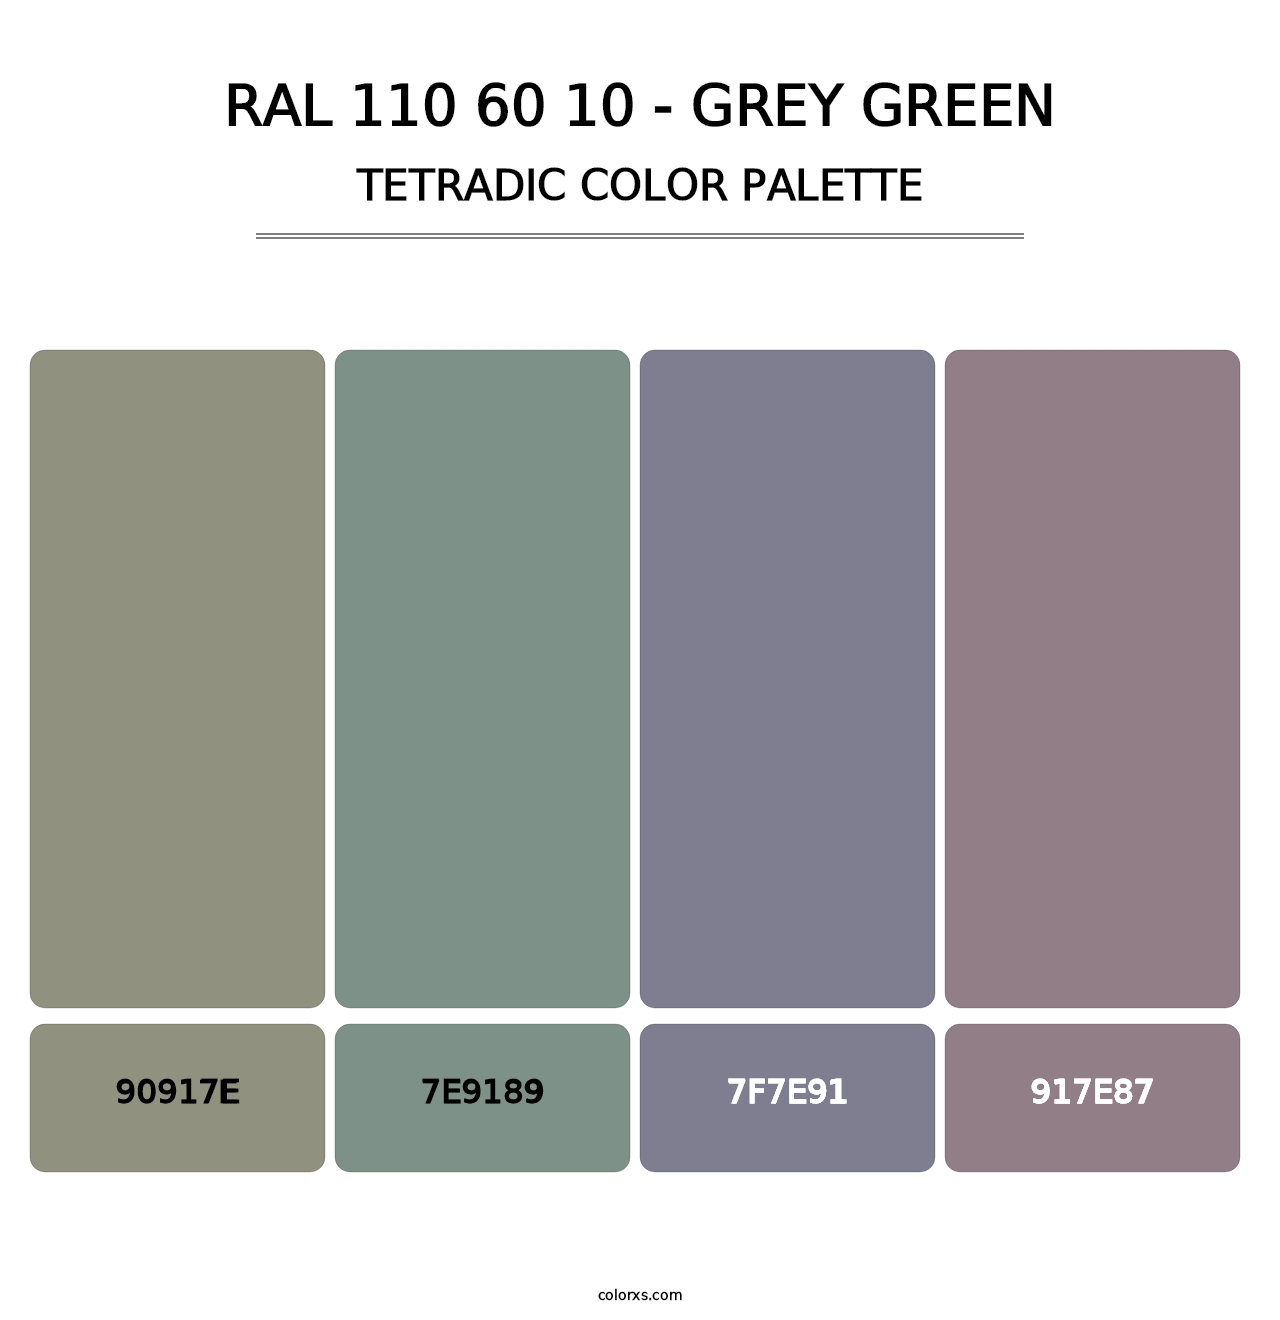 RAL 110 60 10 - Grey Green - Tetradic Color Palette